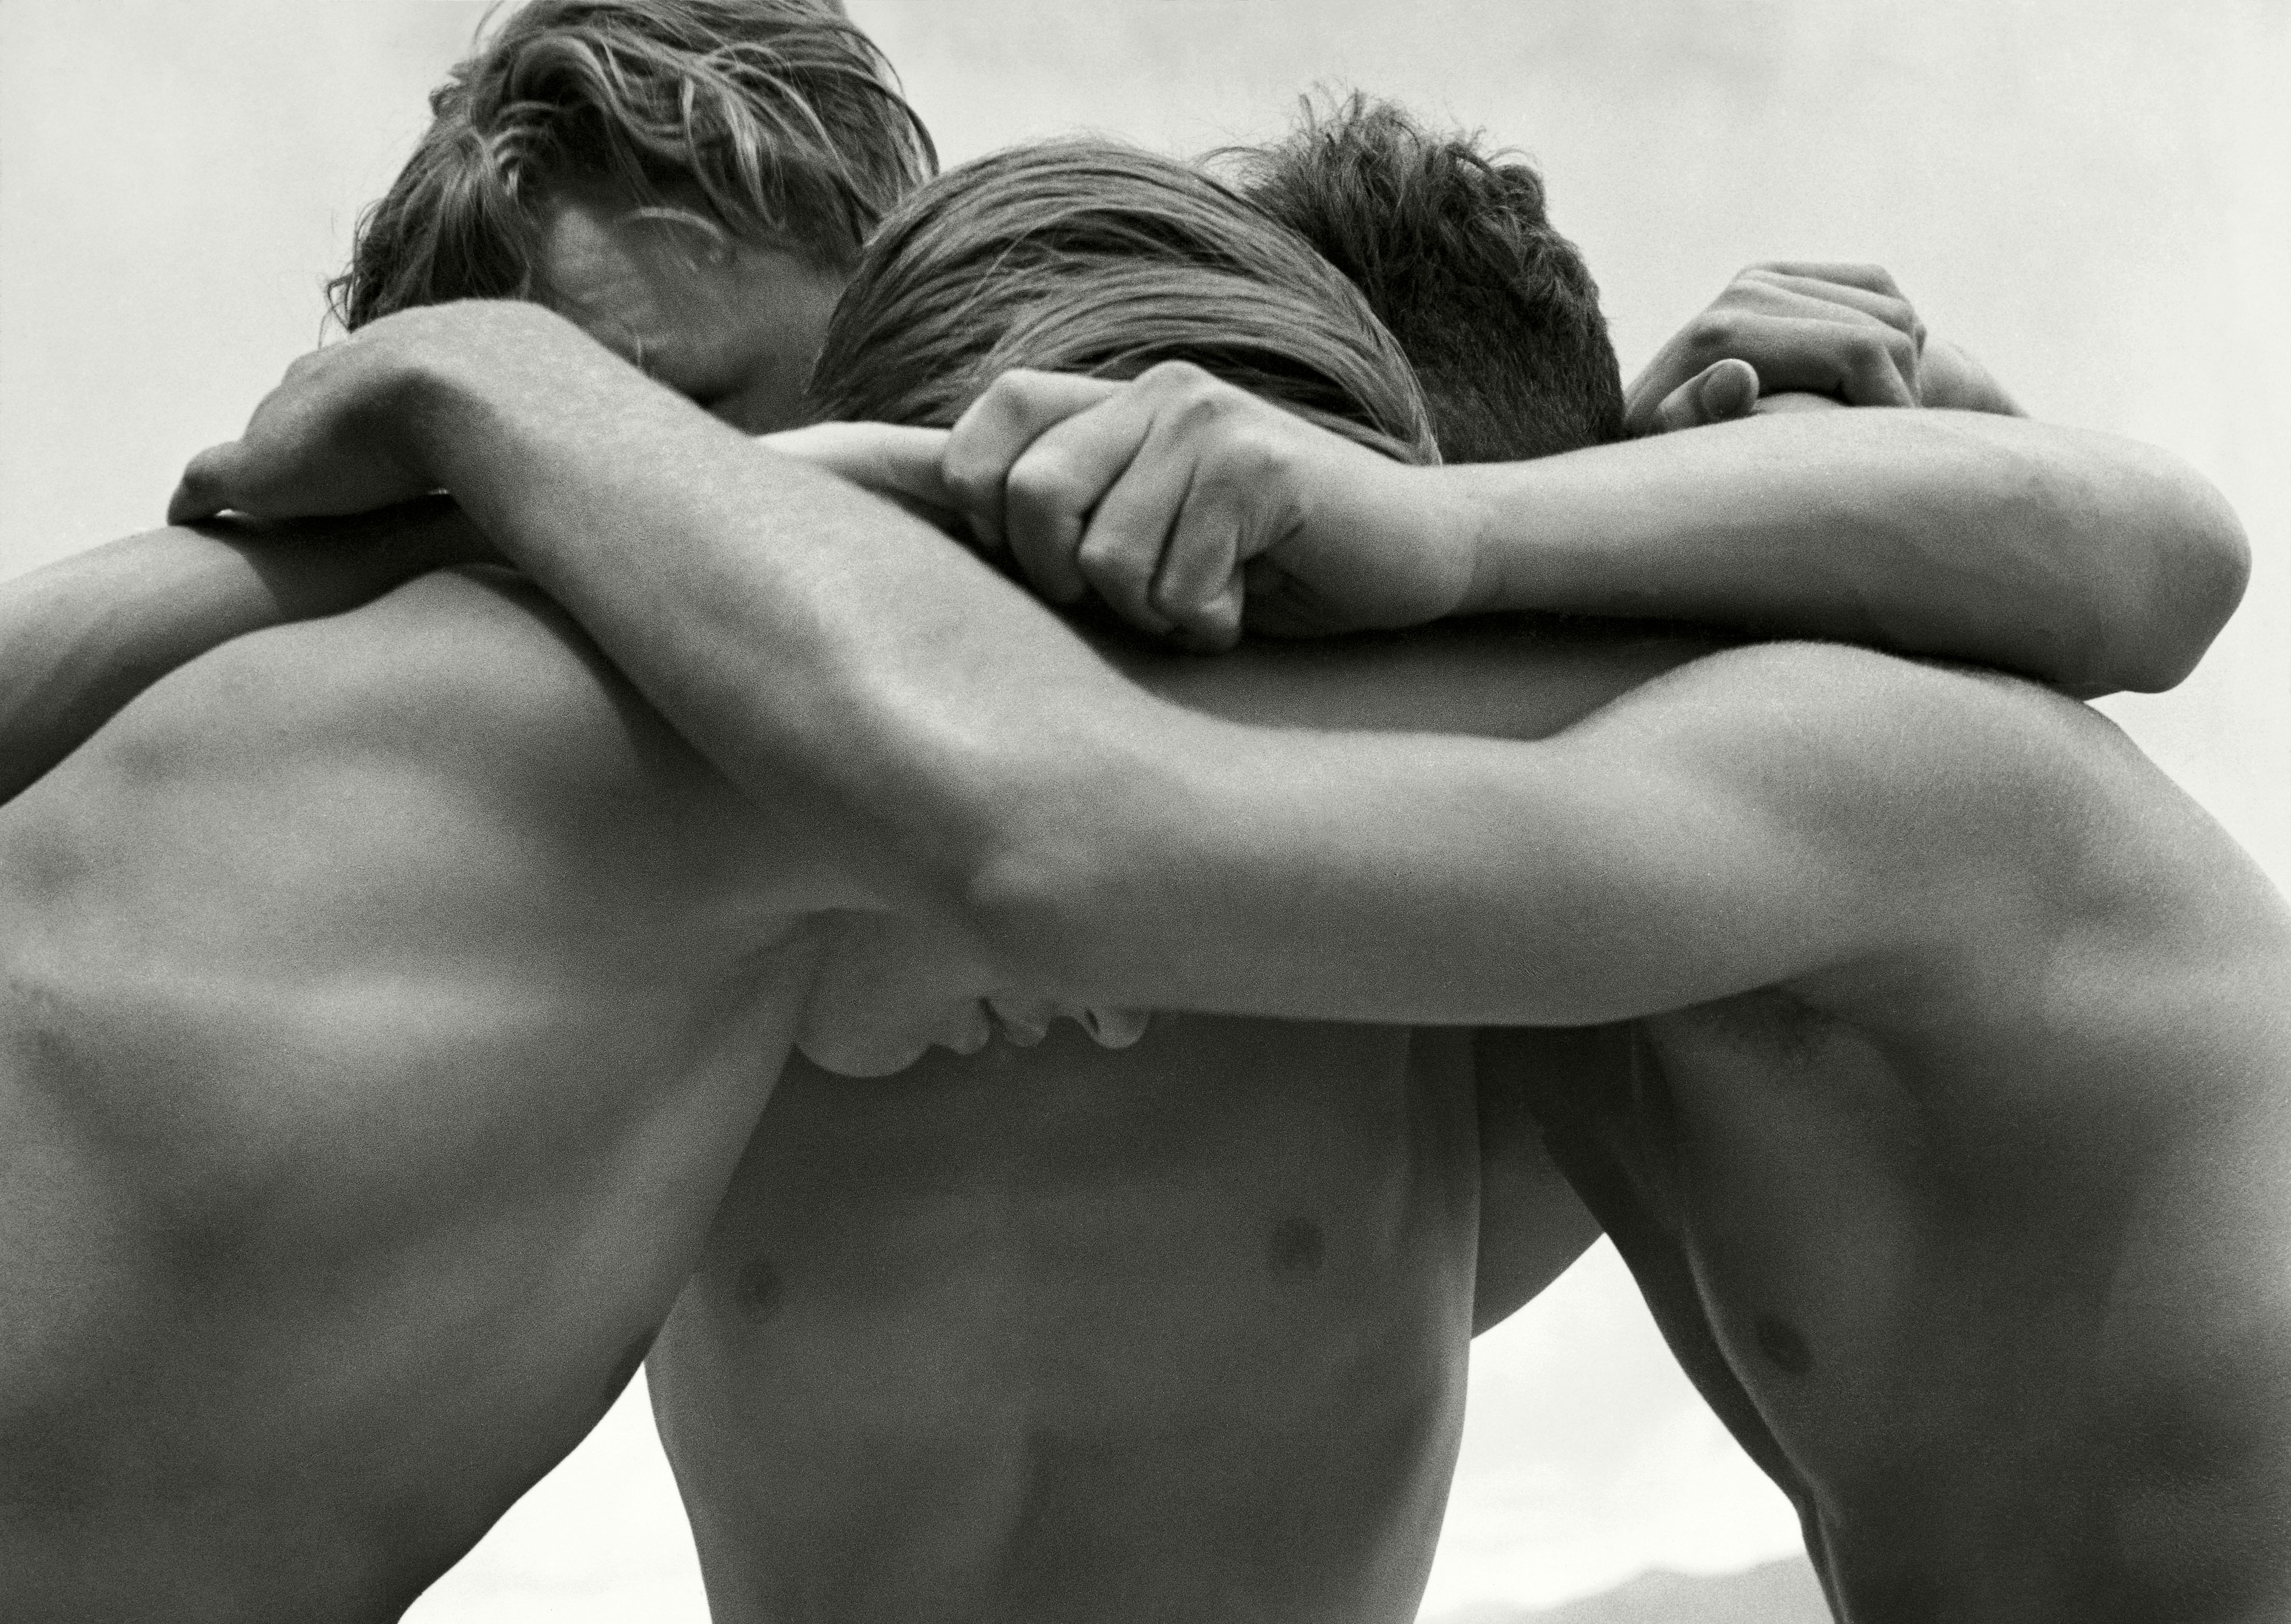 Wrestling boys at the baltic sea by Herbert List 1933